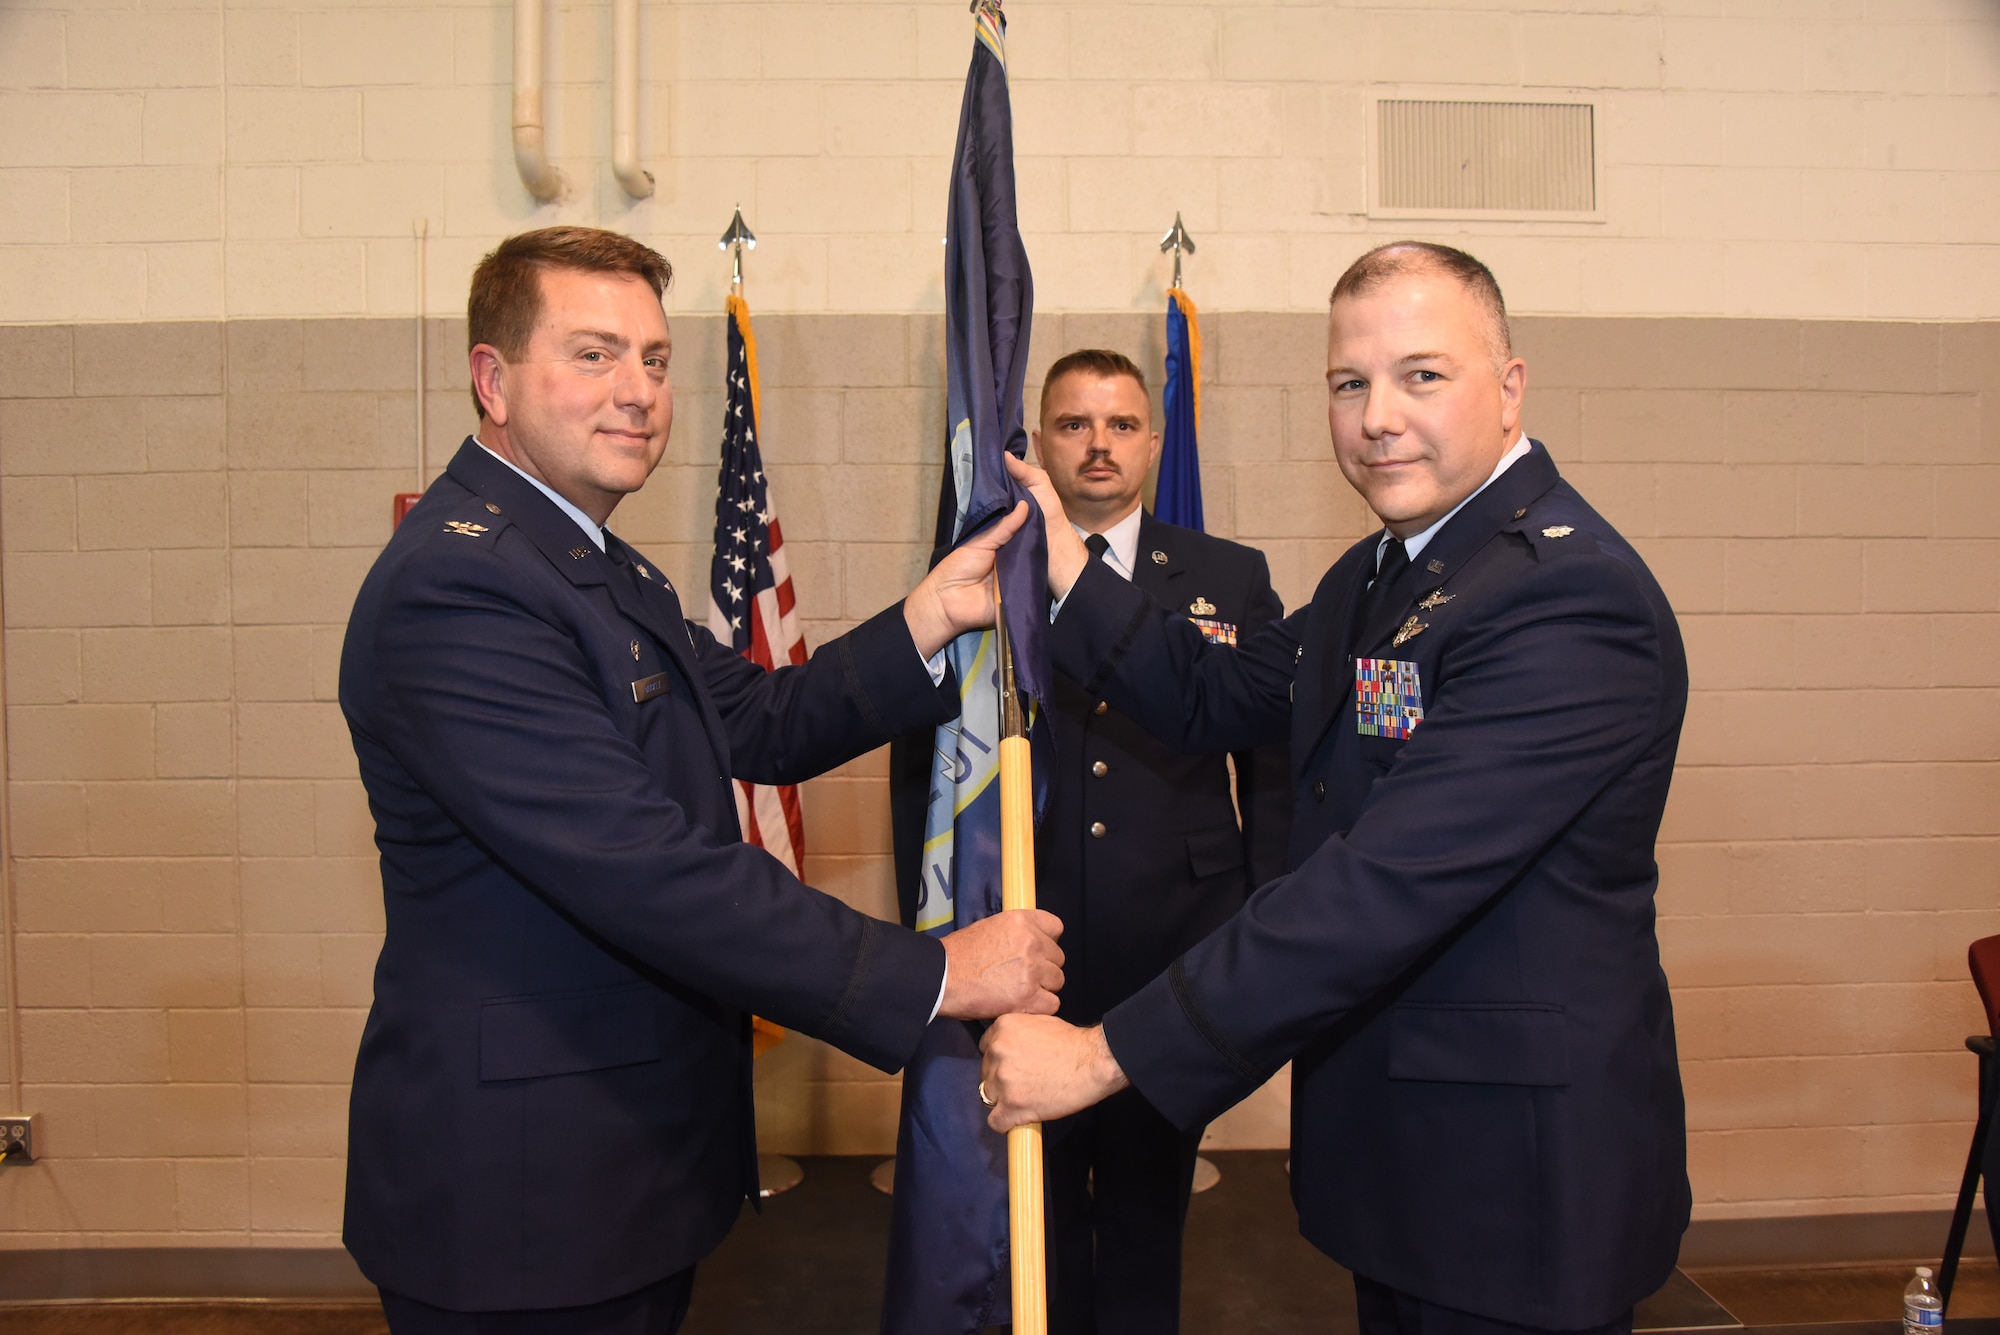 Lt. Col. Jason Kolacia accepts guidon from Col. Mark Muckey, Commander of the 185th Air Refueling Wing